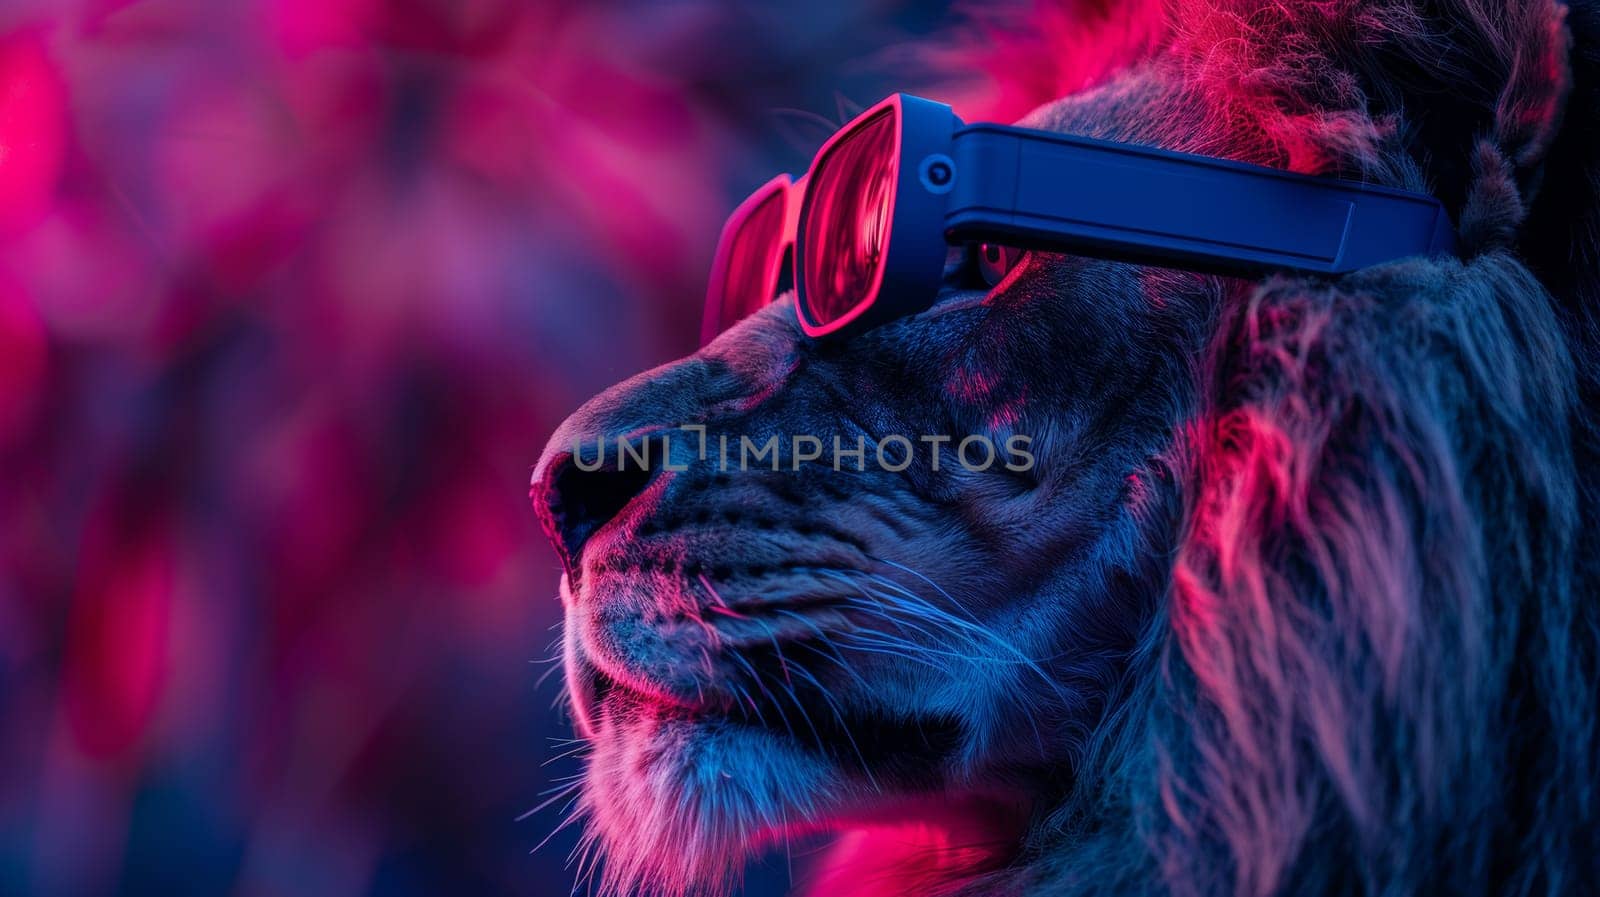 A lion wearing sunglasses and a red tie with blue background, AI by starush